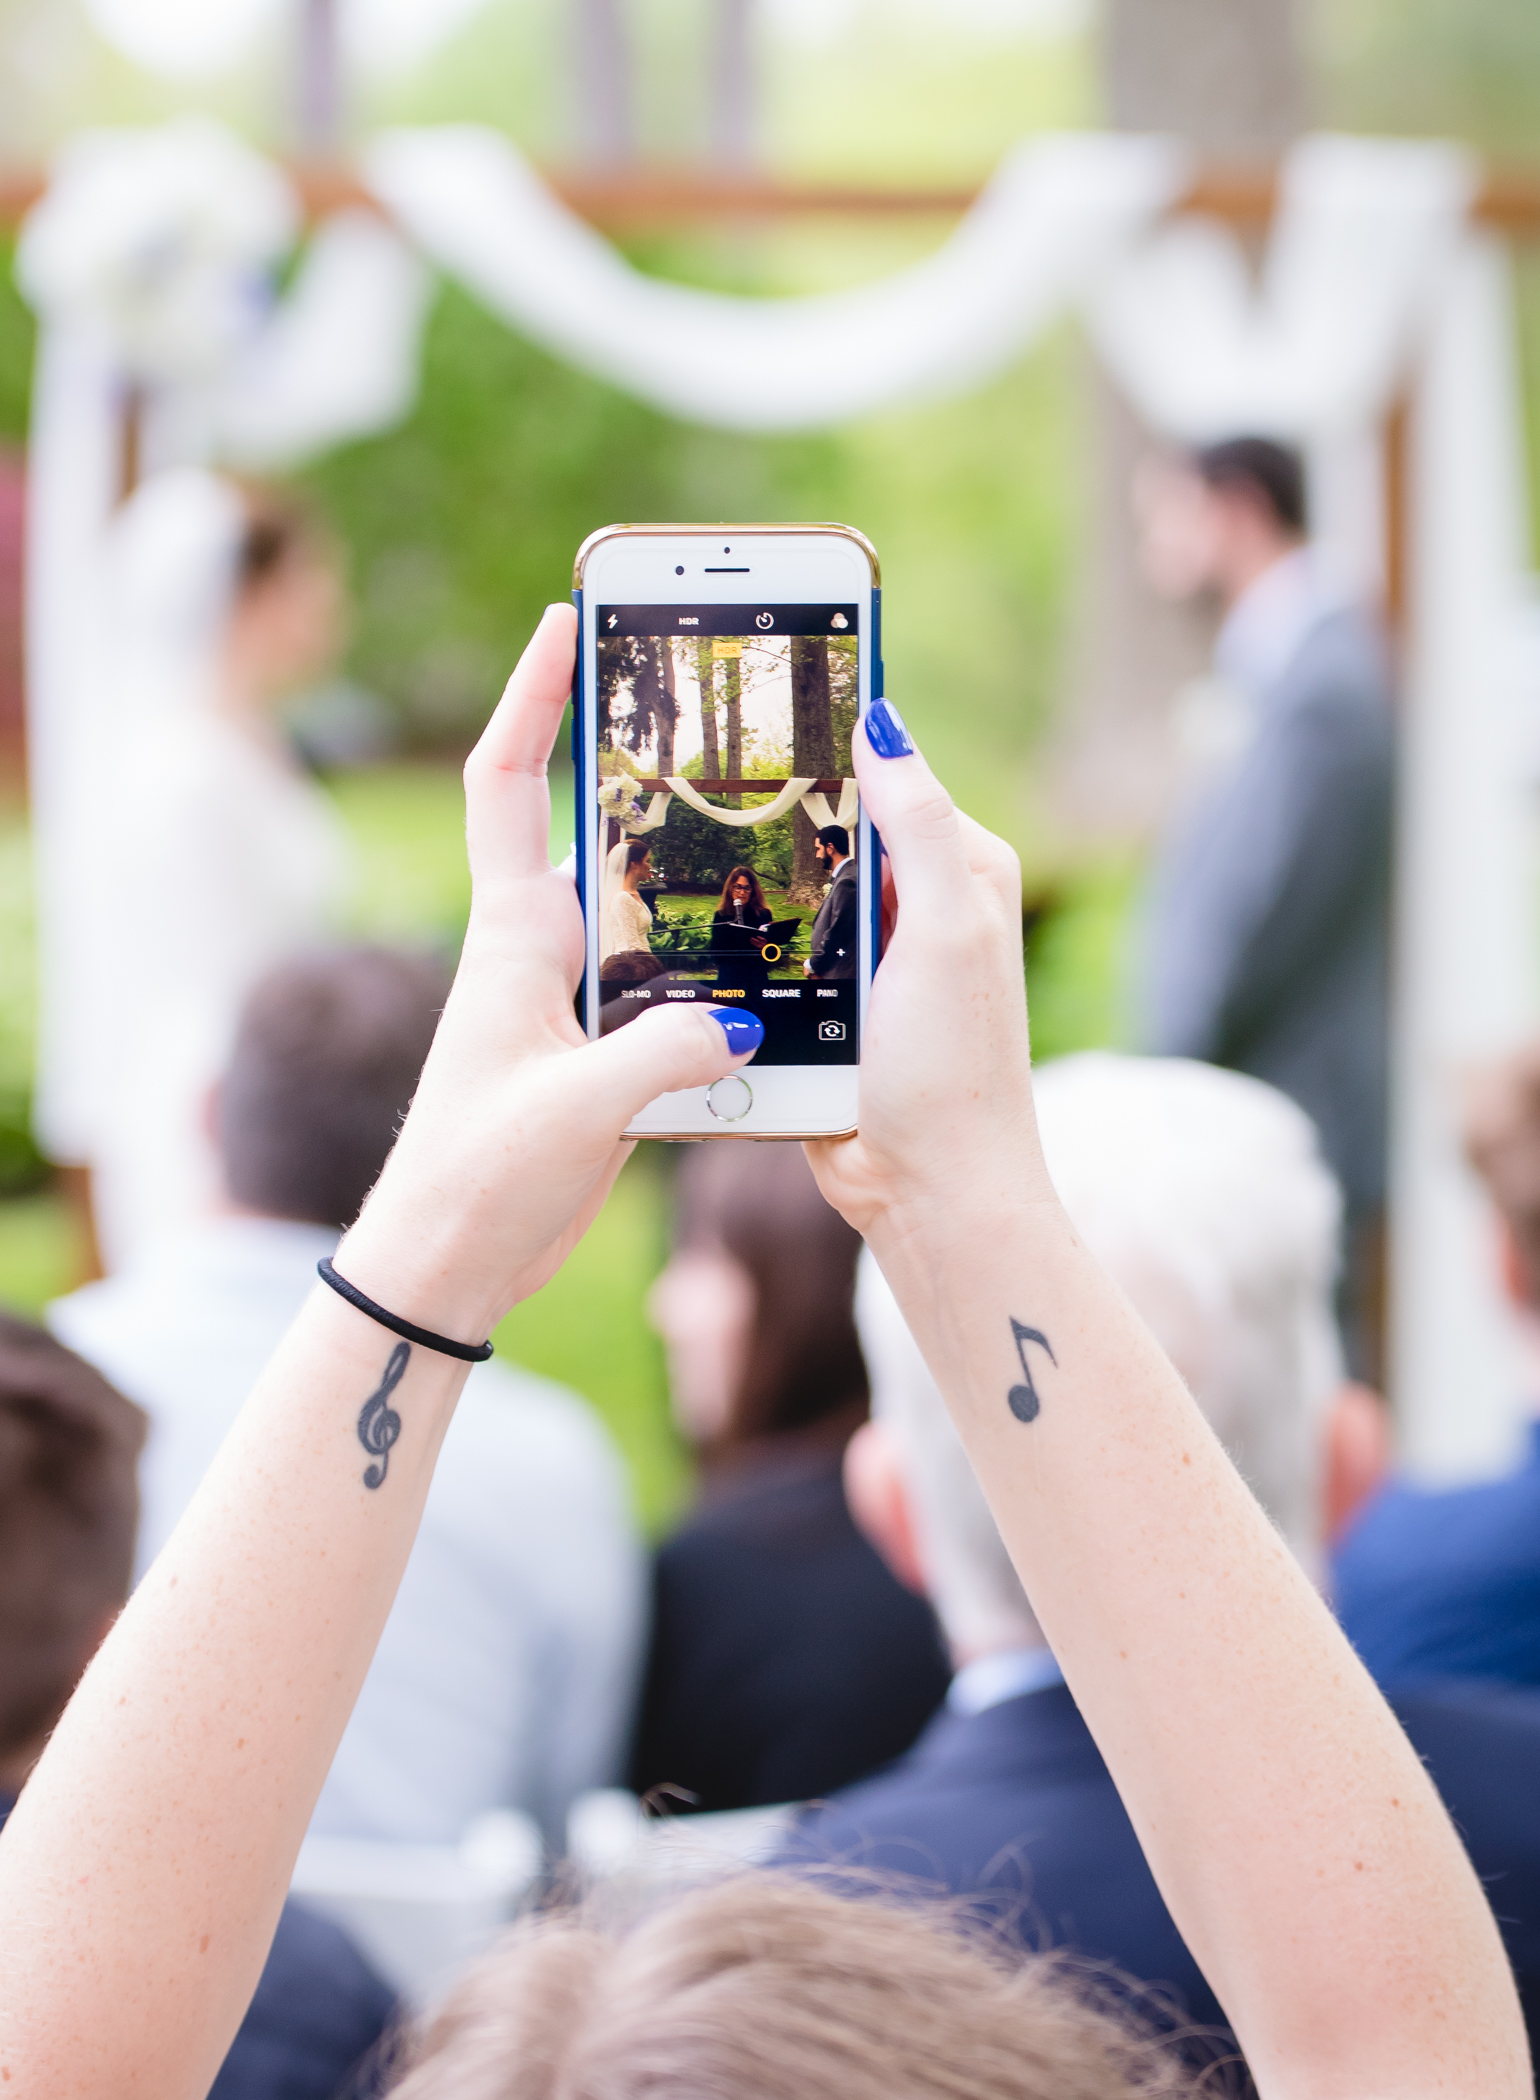 unplugged wedding ceremony Choosing how to have an unplugged wedding ceremony (or not) is one of the must-answer wedding planning decisions couples need to make today. If you're still not sure which way to go, let the wedding planning tips and perspectives in this post help you out.